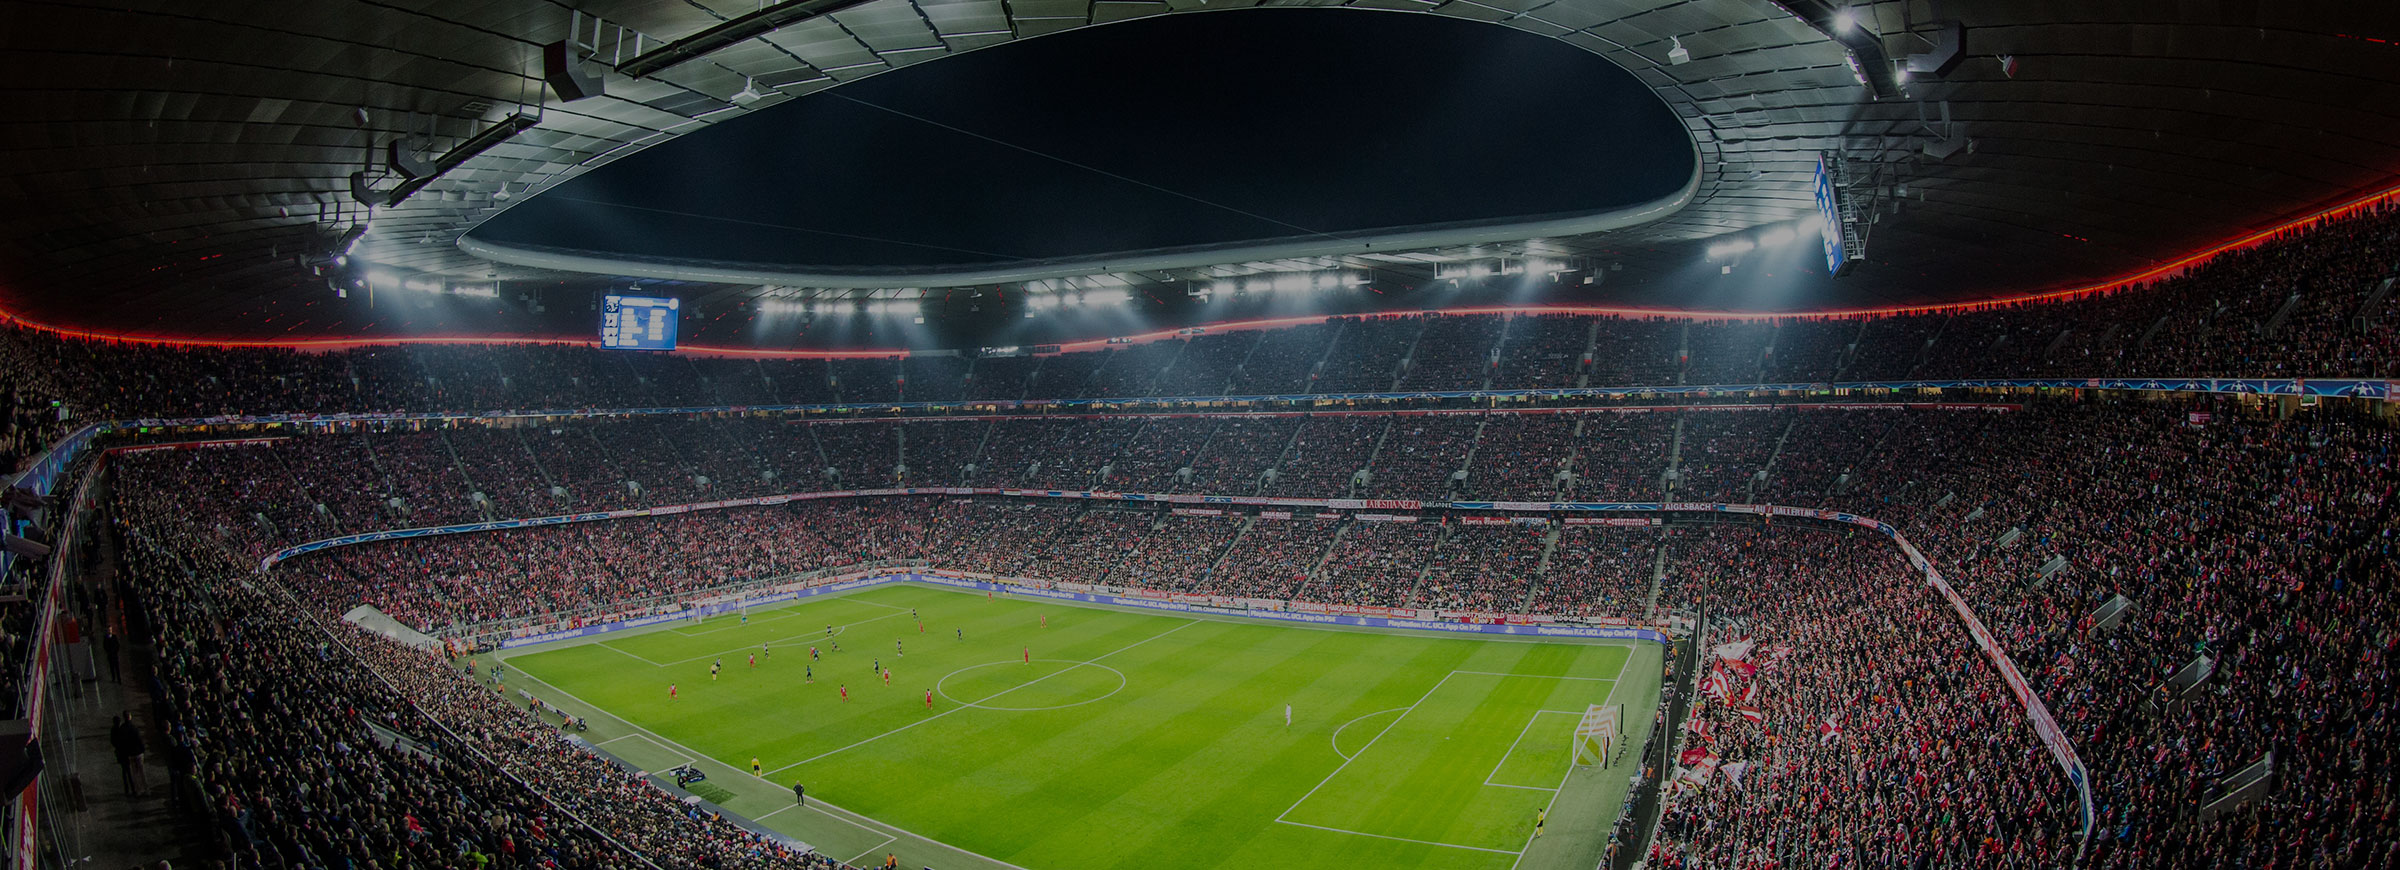 Image of stadium and fans for Sqor Sports NGINX Plus case study